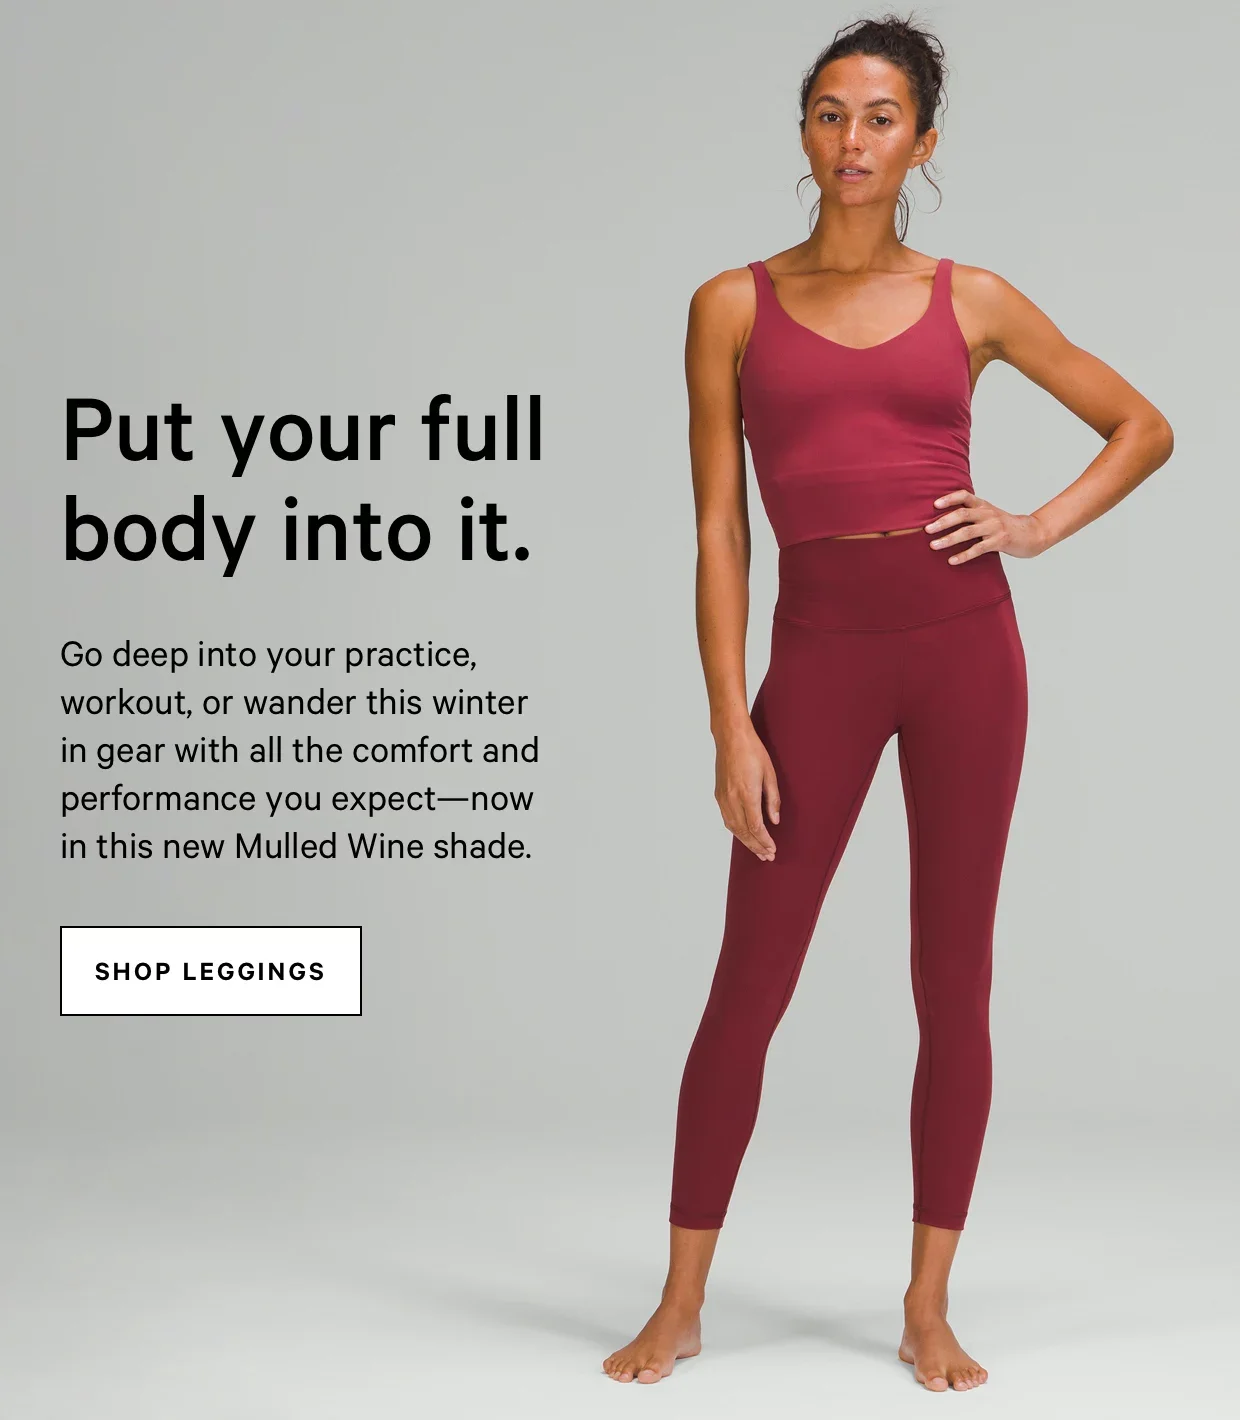 lululemon: Go for a smooth finish | Milled